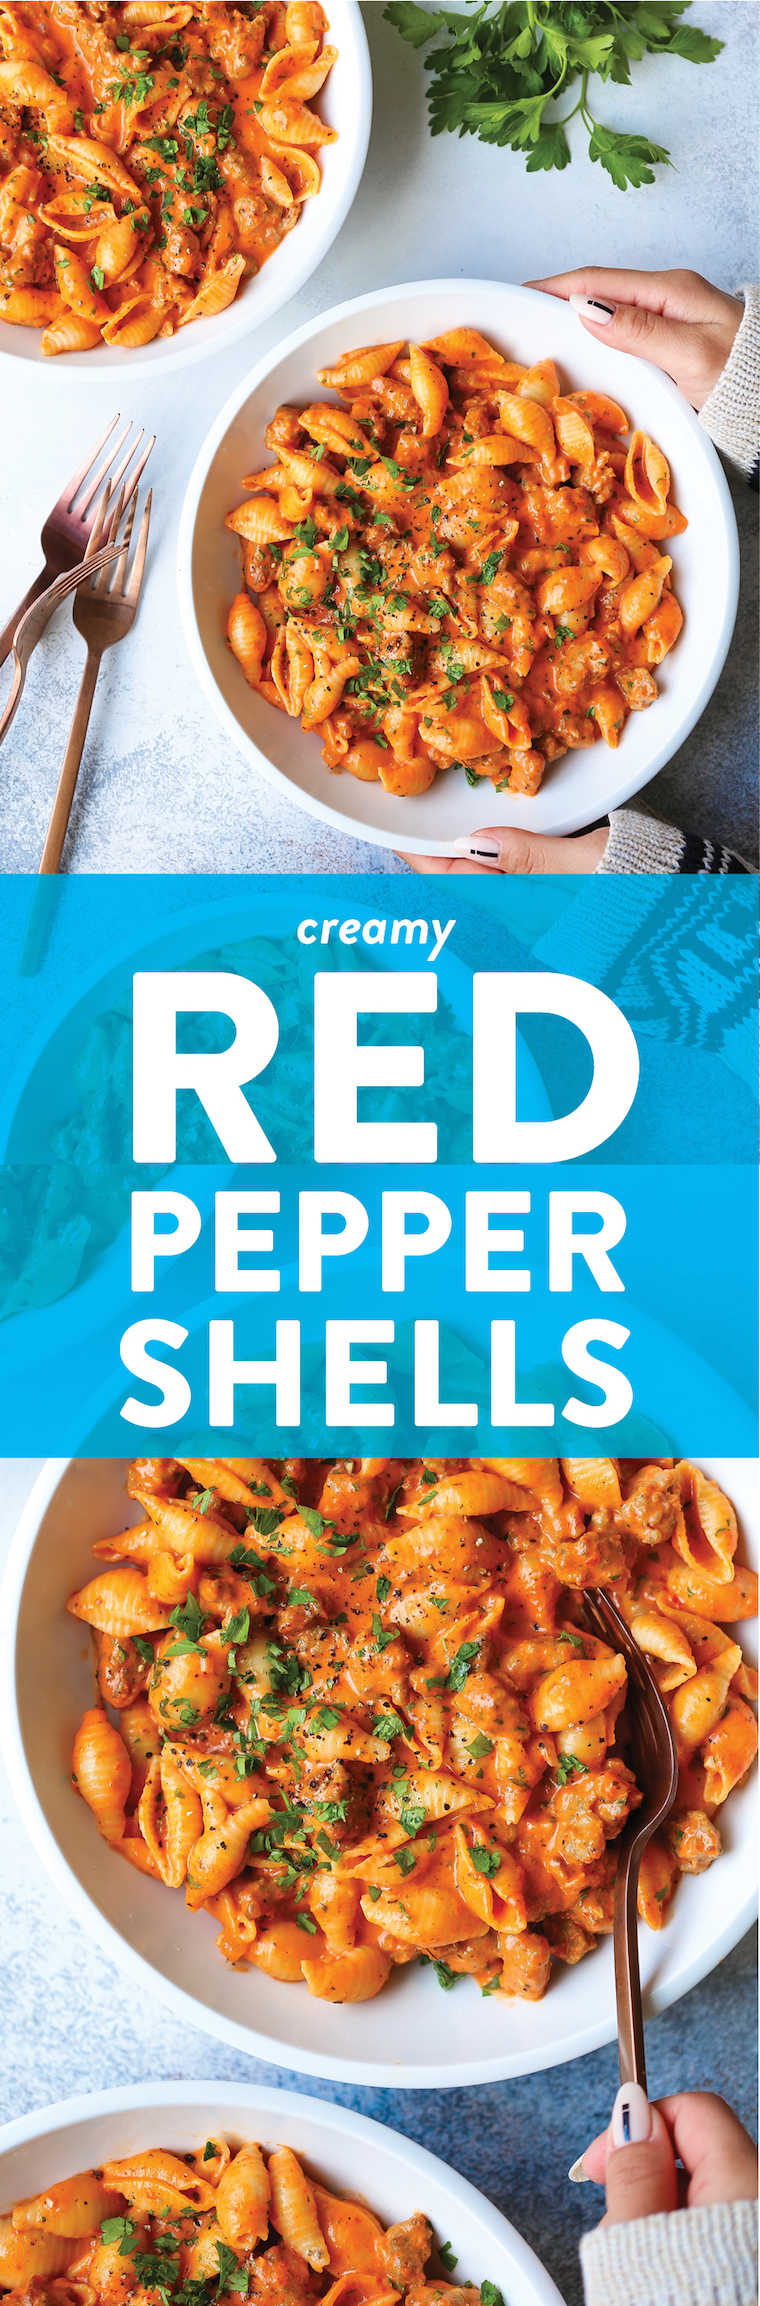 Creamy Red Pepper Shells - Crumbled Italian sausage, Parmesan, basil, and the most EPIC red pepper cream sauce. It's irresistible and completely addictive!